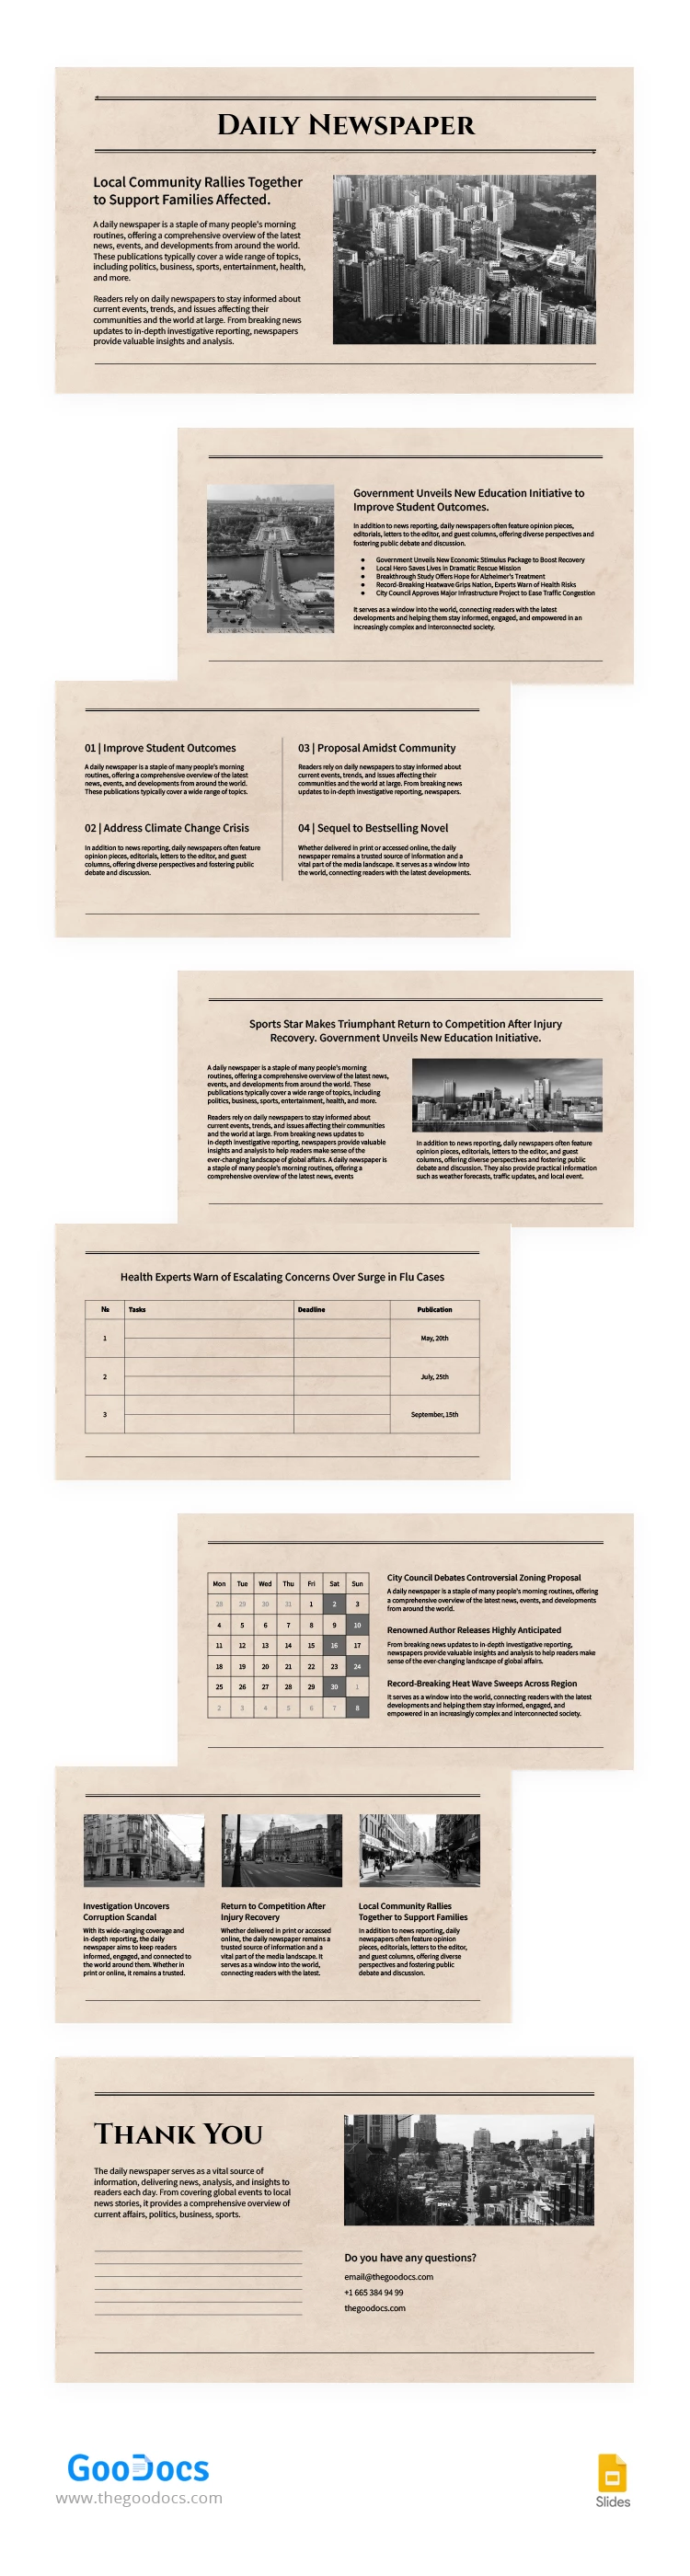 Vintage Daily Newspaper - free Google Docs Template - 10068561